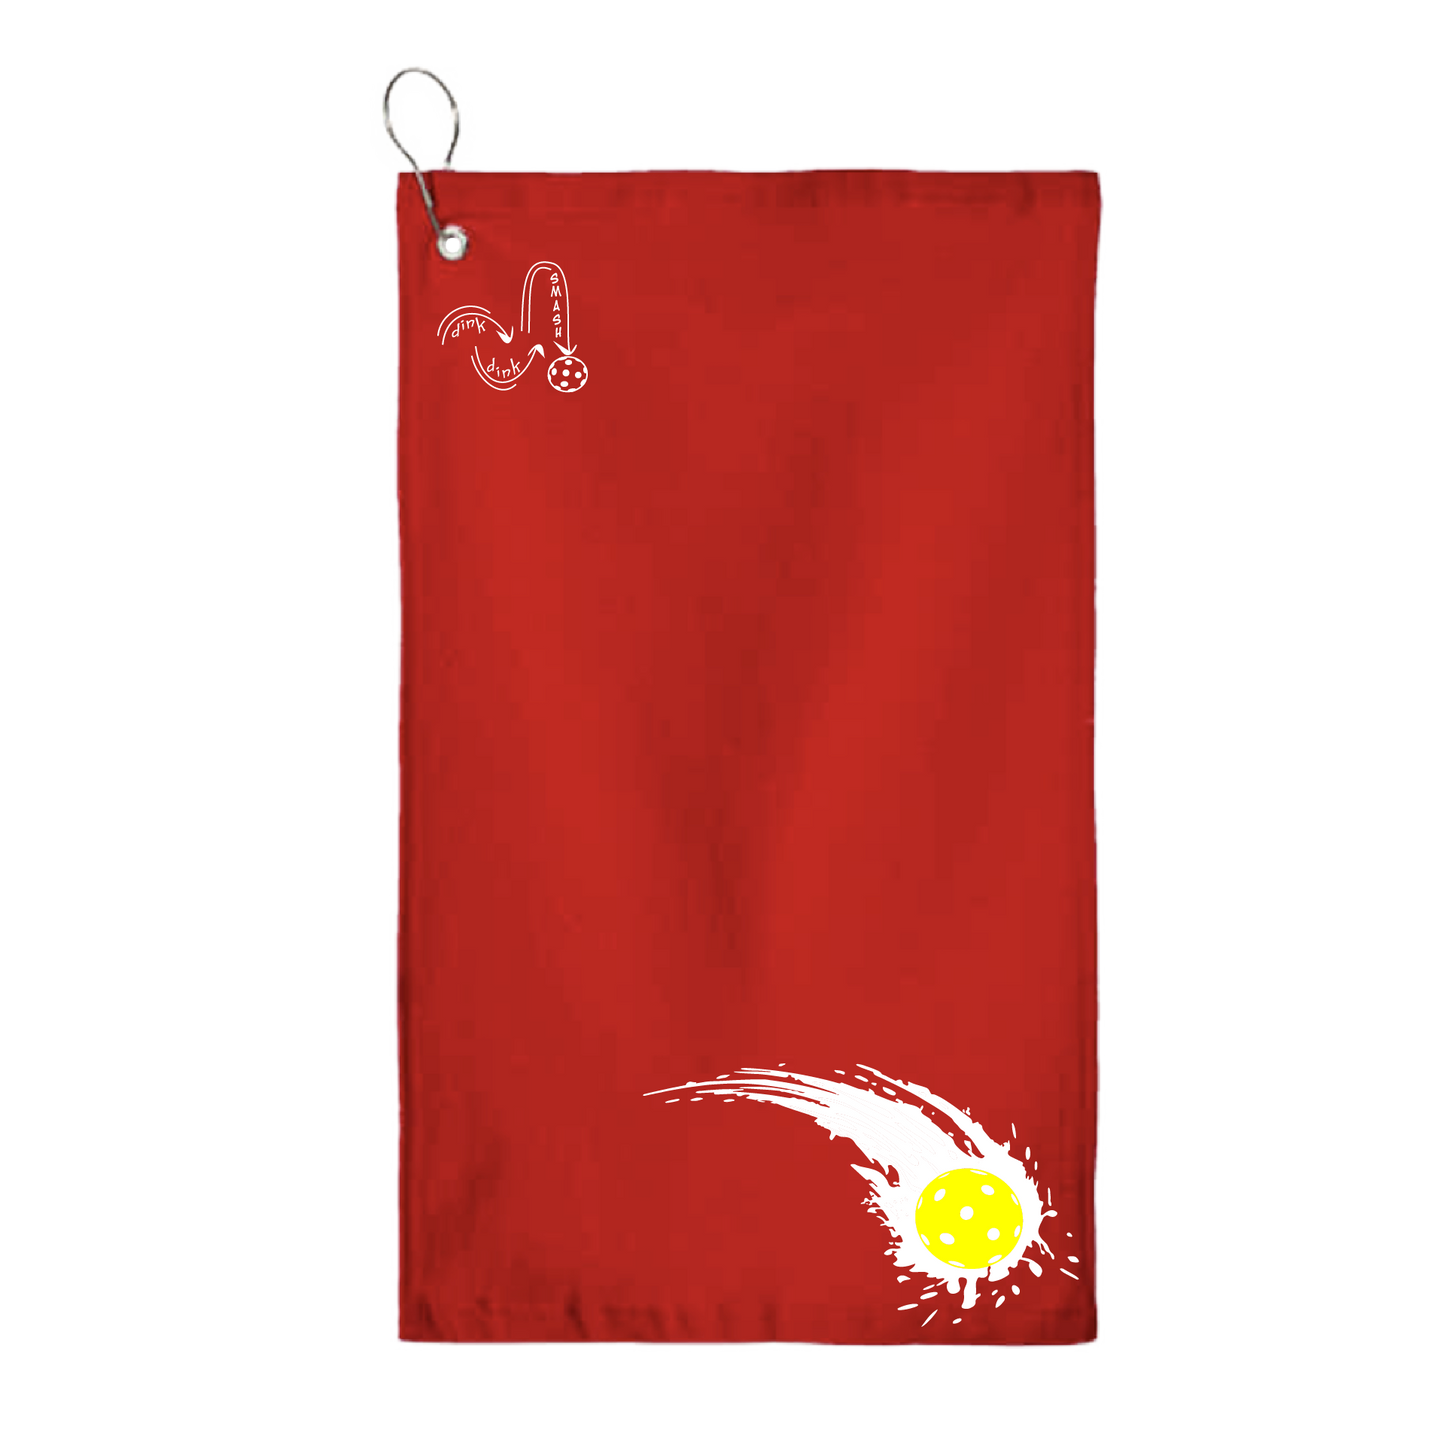 This Impact Pickleball towel is crafted with cotton terry velour for optimal performance. It features grommets, hooks, and hemmed edges for added durability. It's perfect for completing your pickleball gear, and an ideal gift for friends and tournaments. The towel is designed to be both absorbent and lightweight, so you can remain dry and comfortable while you play. 